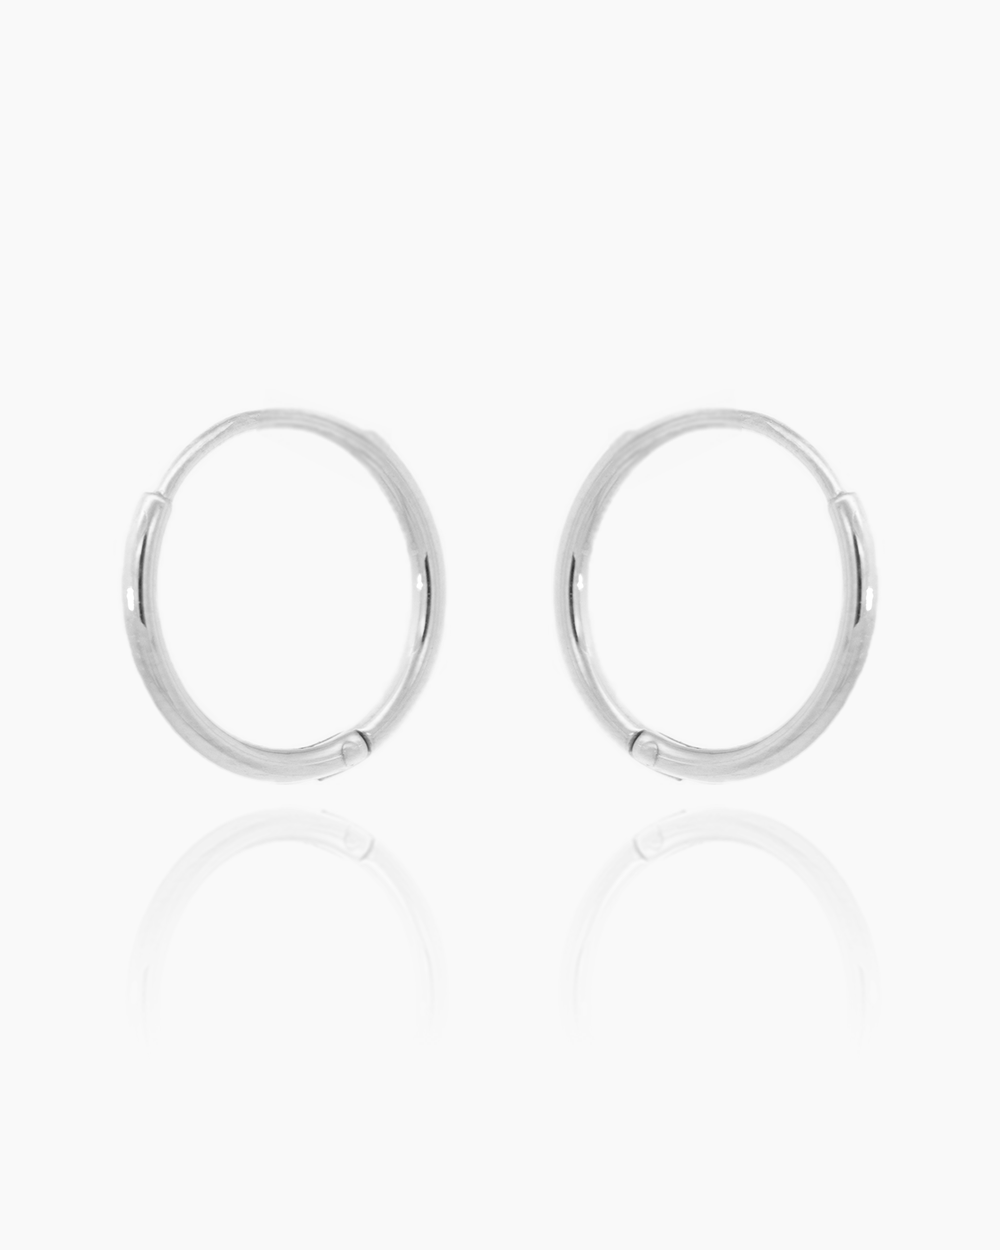 Jessica Silver Hoops